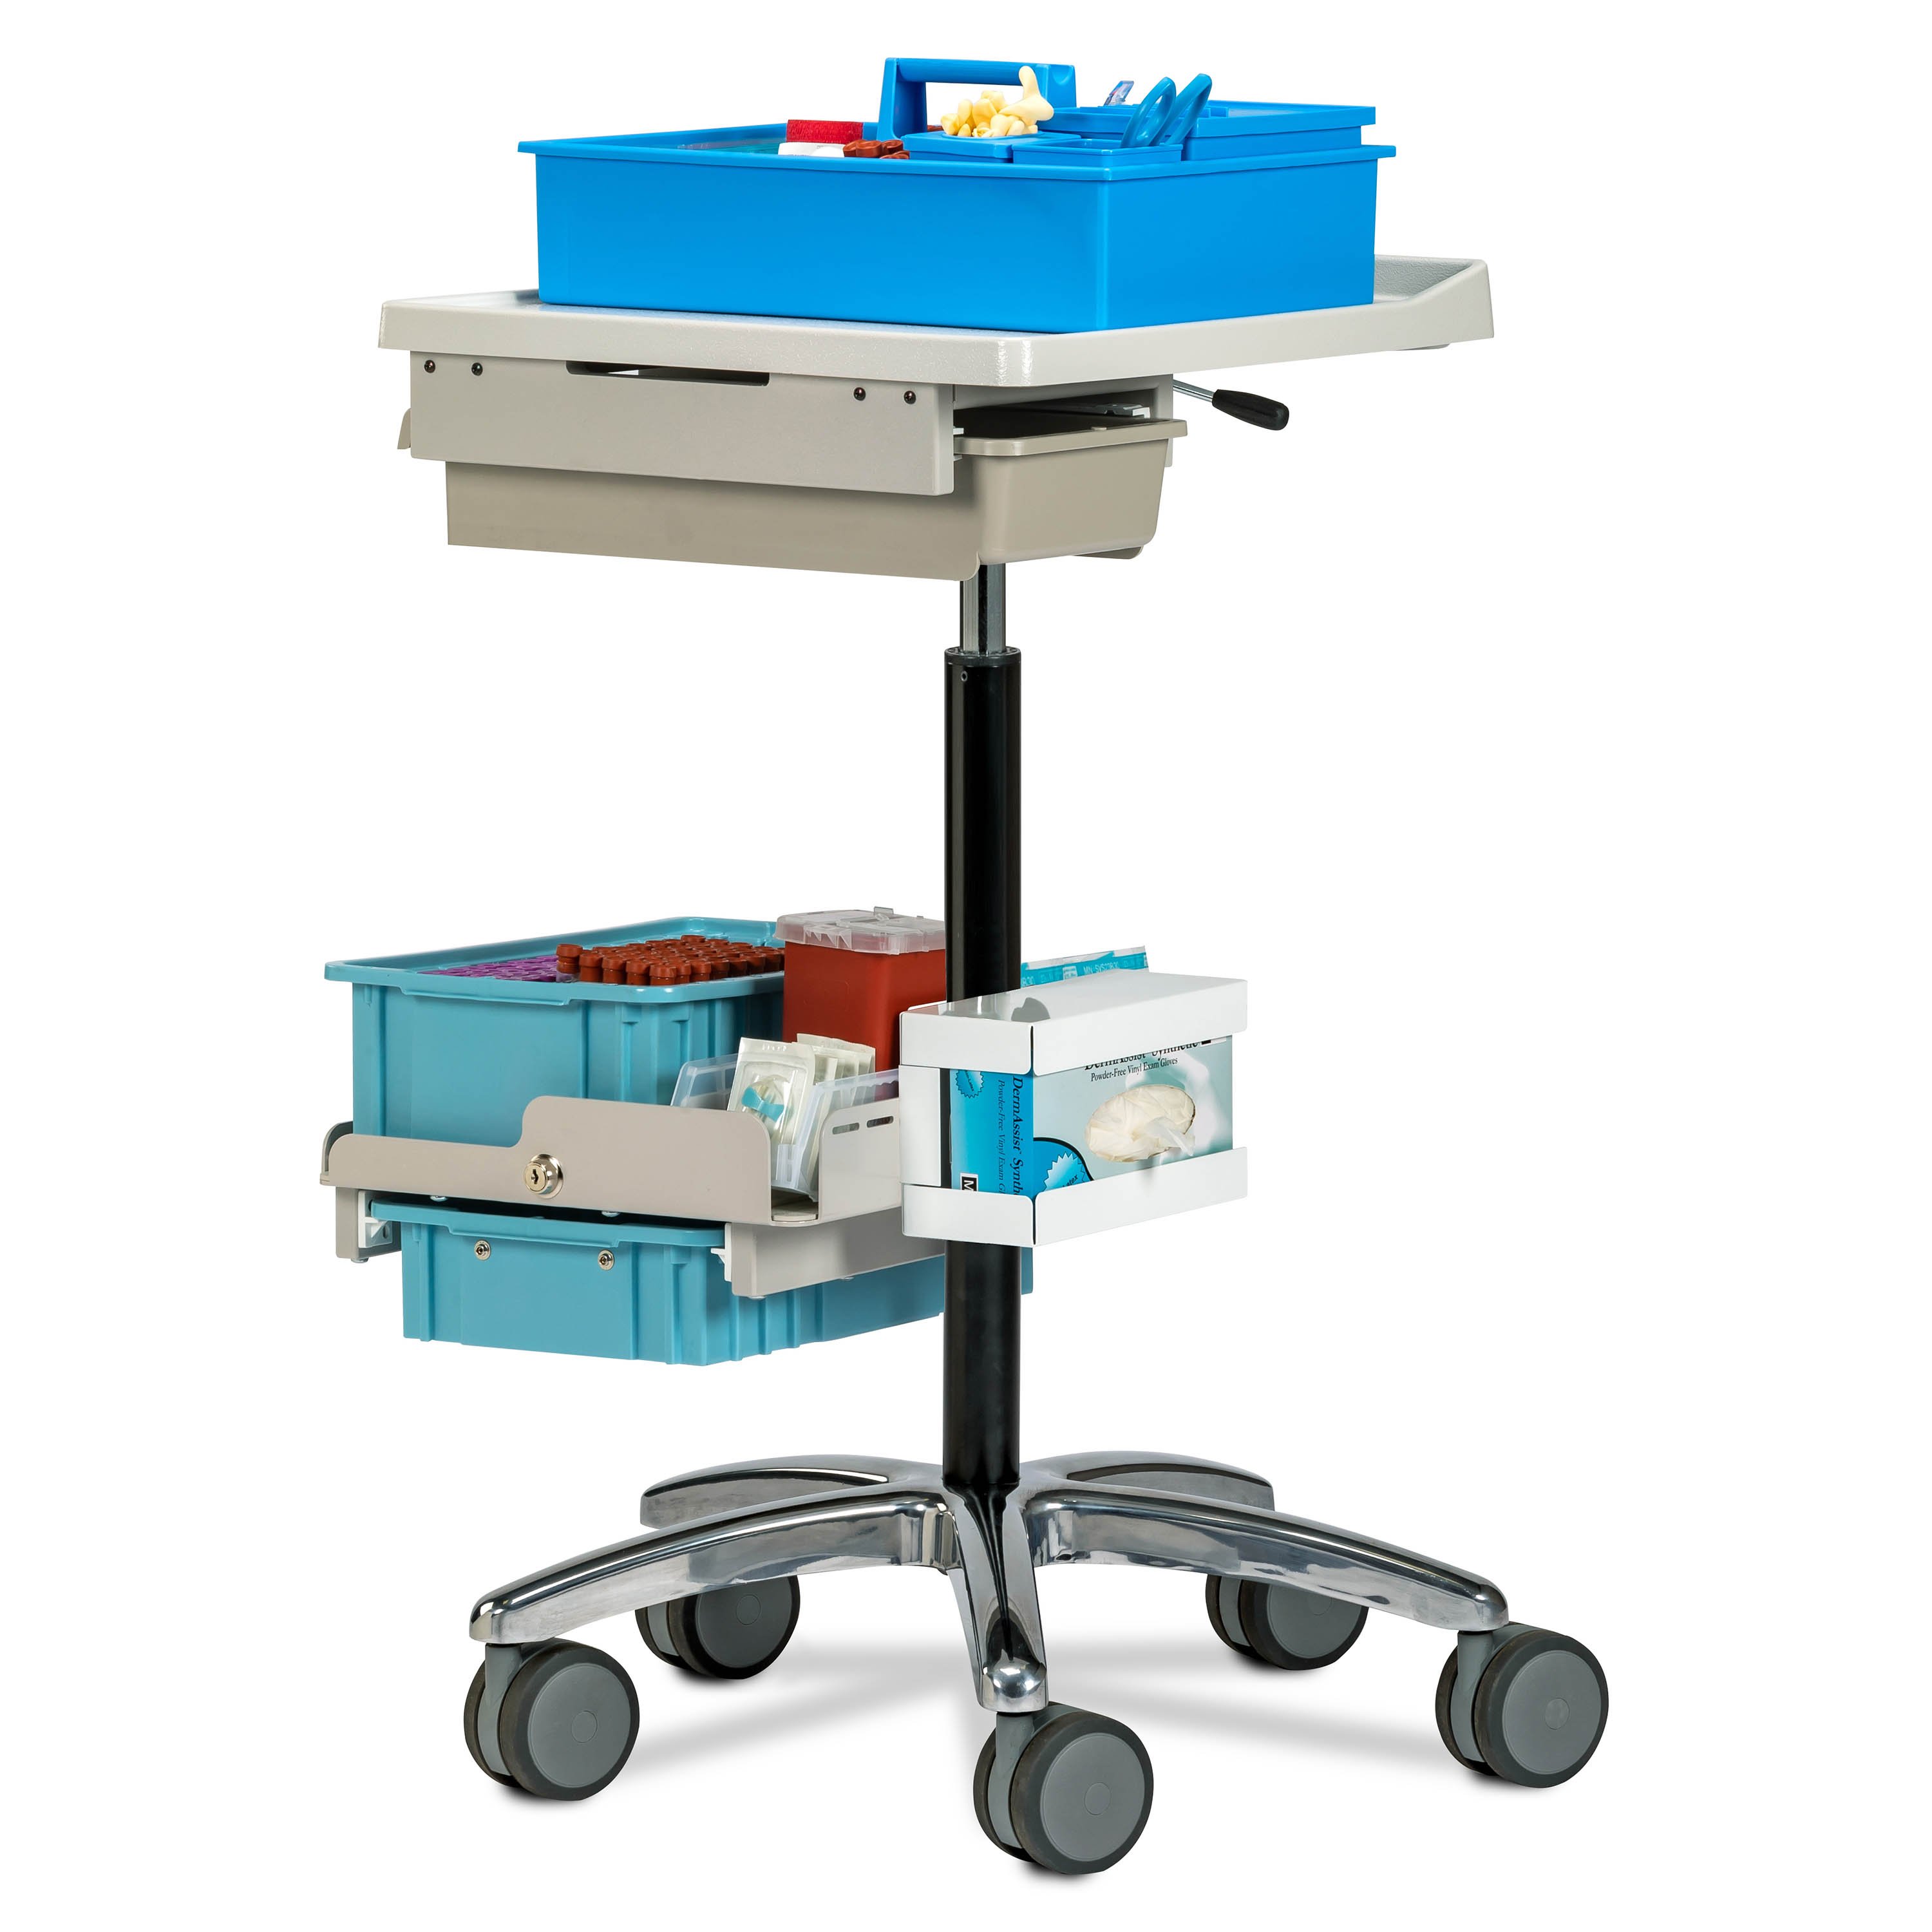 UNISLAT: Medical Supply and Storage Systems